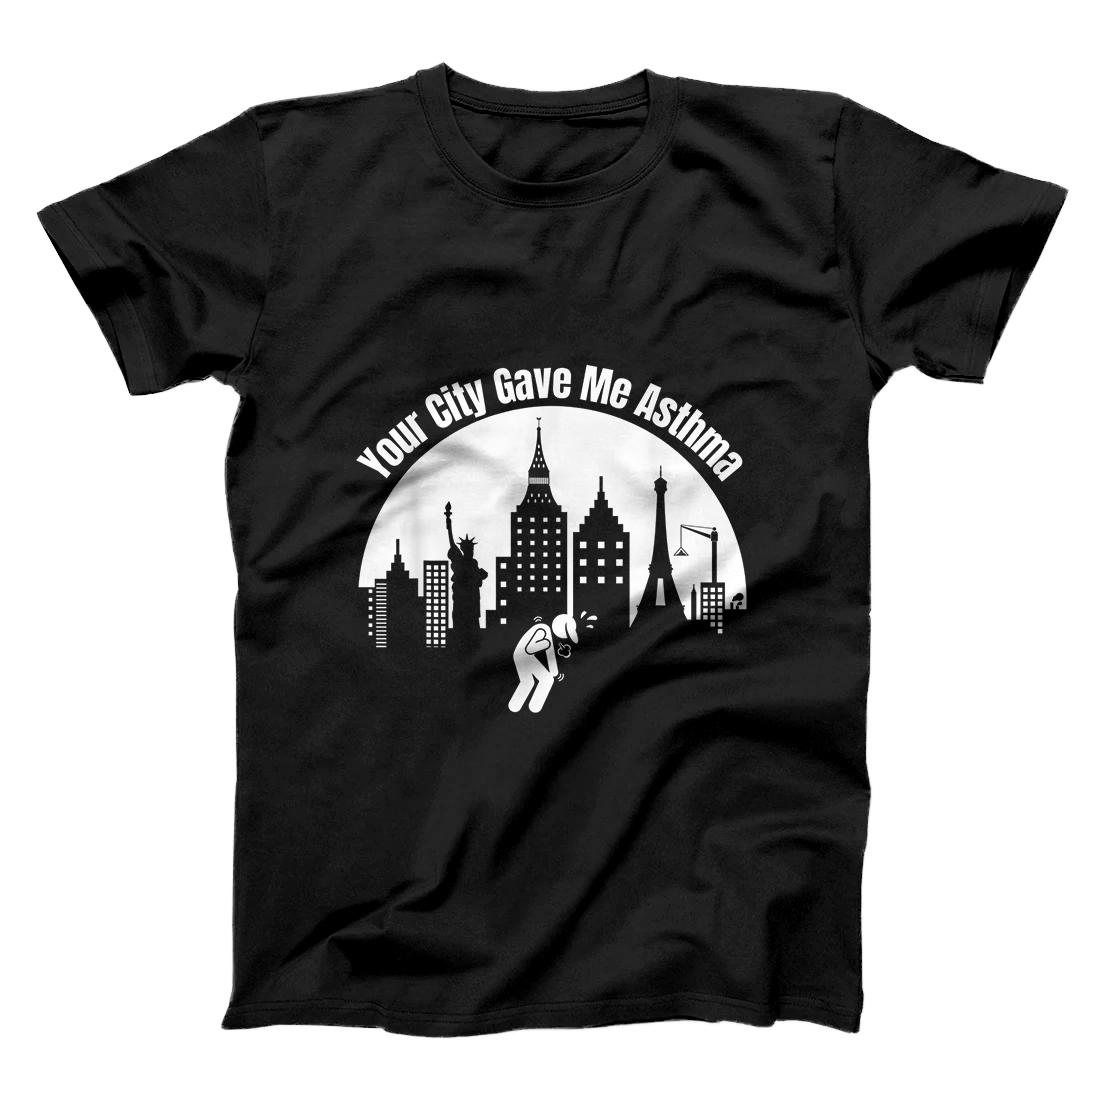 Personalized Your City Gave Me Asthma - Wilbur Soot T-Shirt